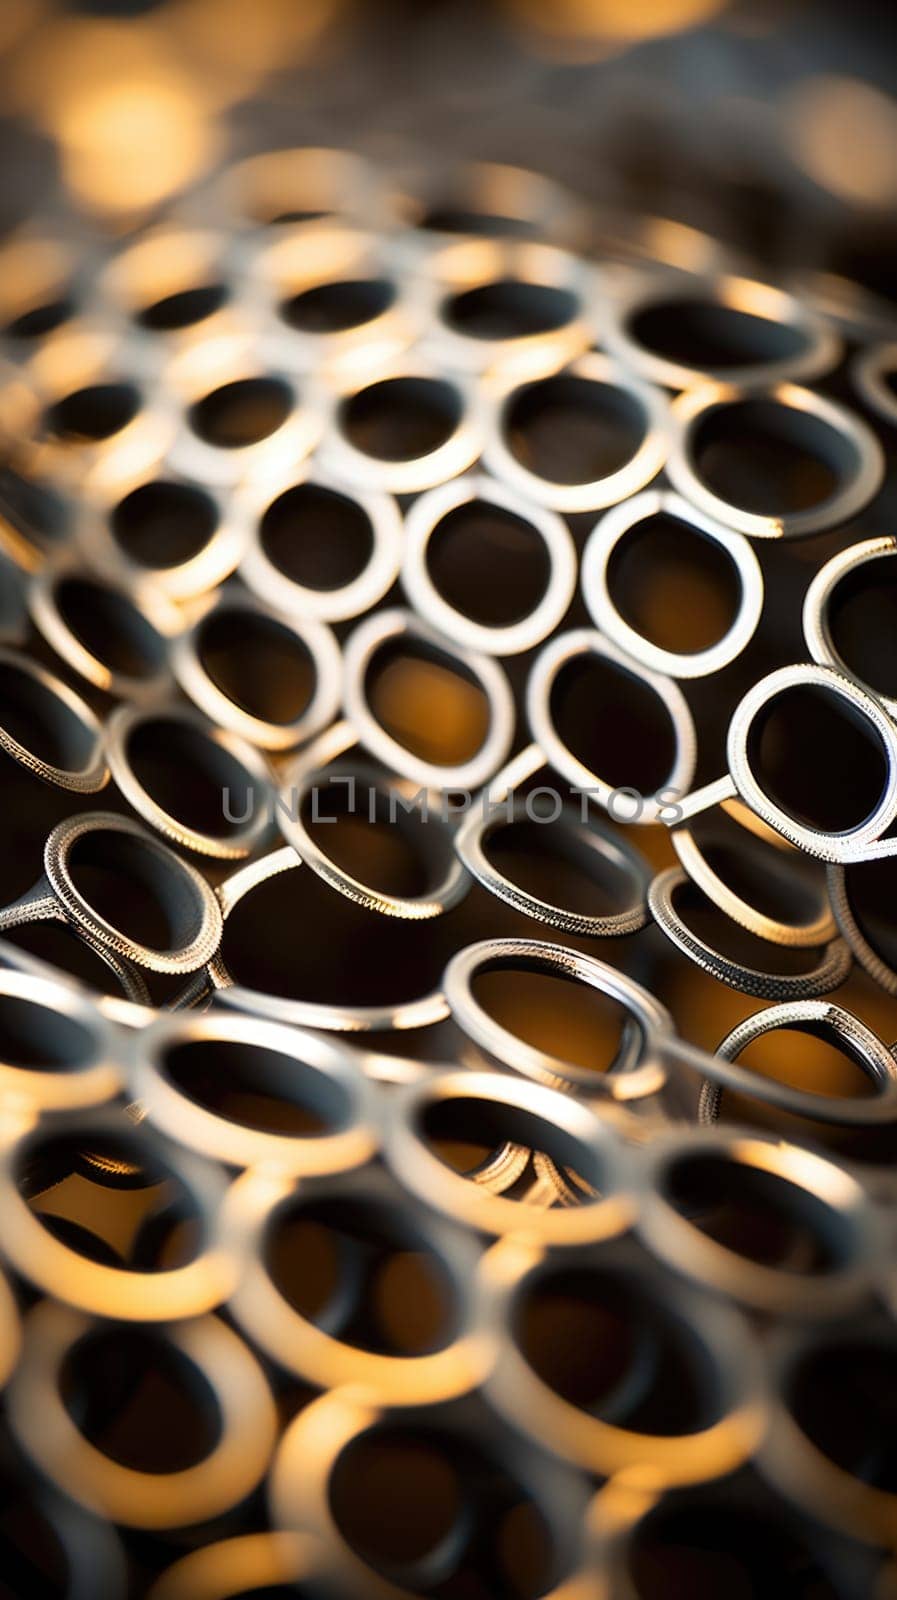 A close up of a metal mesh with circles, AI by starush